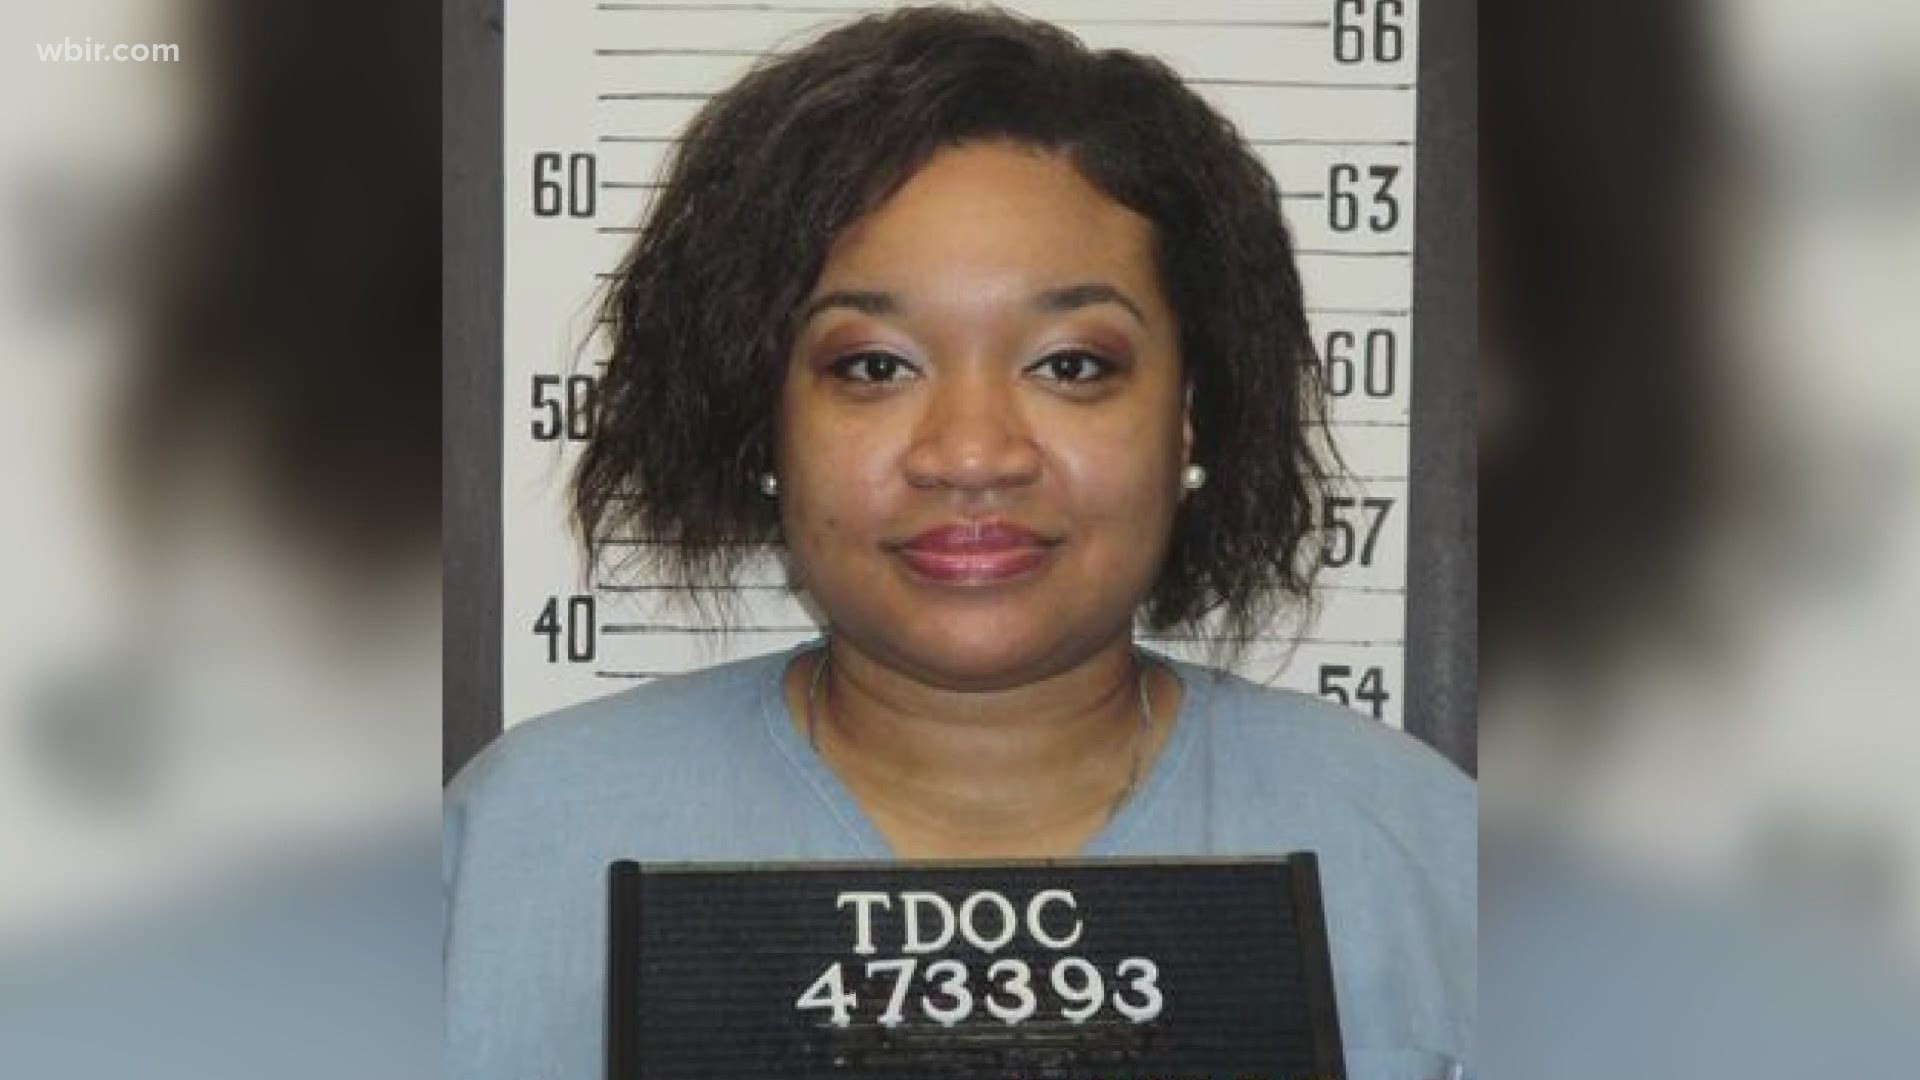 Vanessa Coleman faces a parole hearing Tuesday. She was convicted of playing a role in the Christian-Newsom killings.